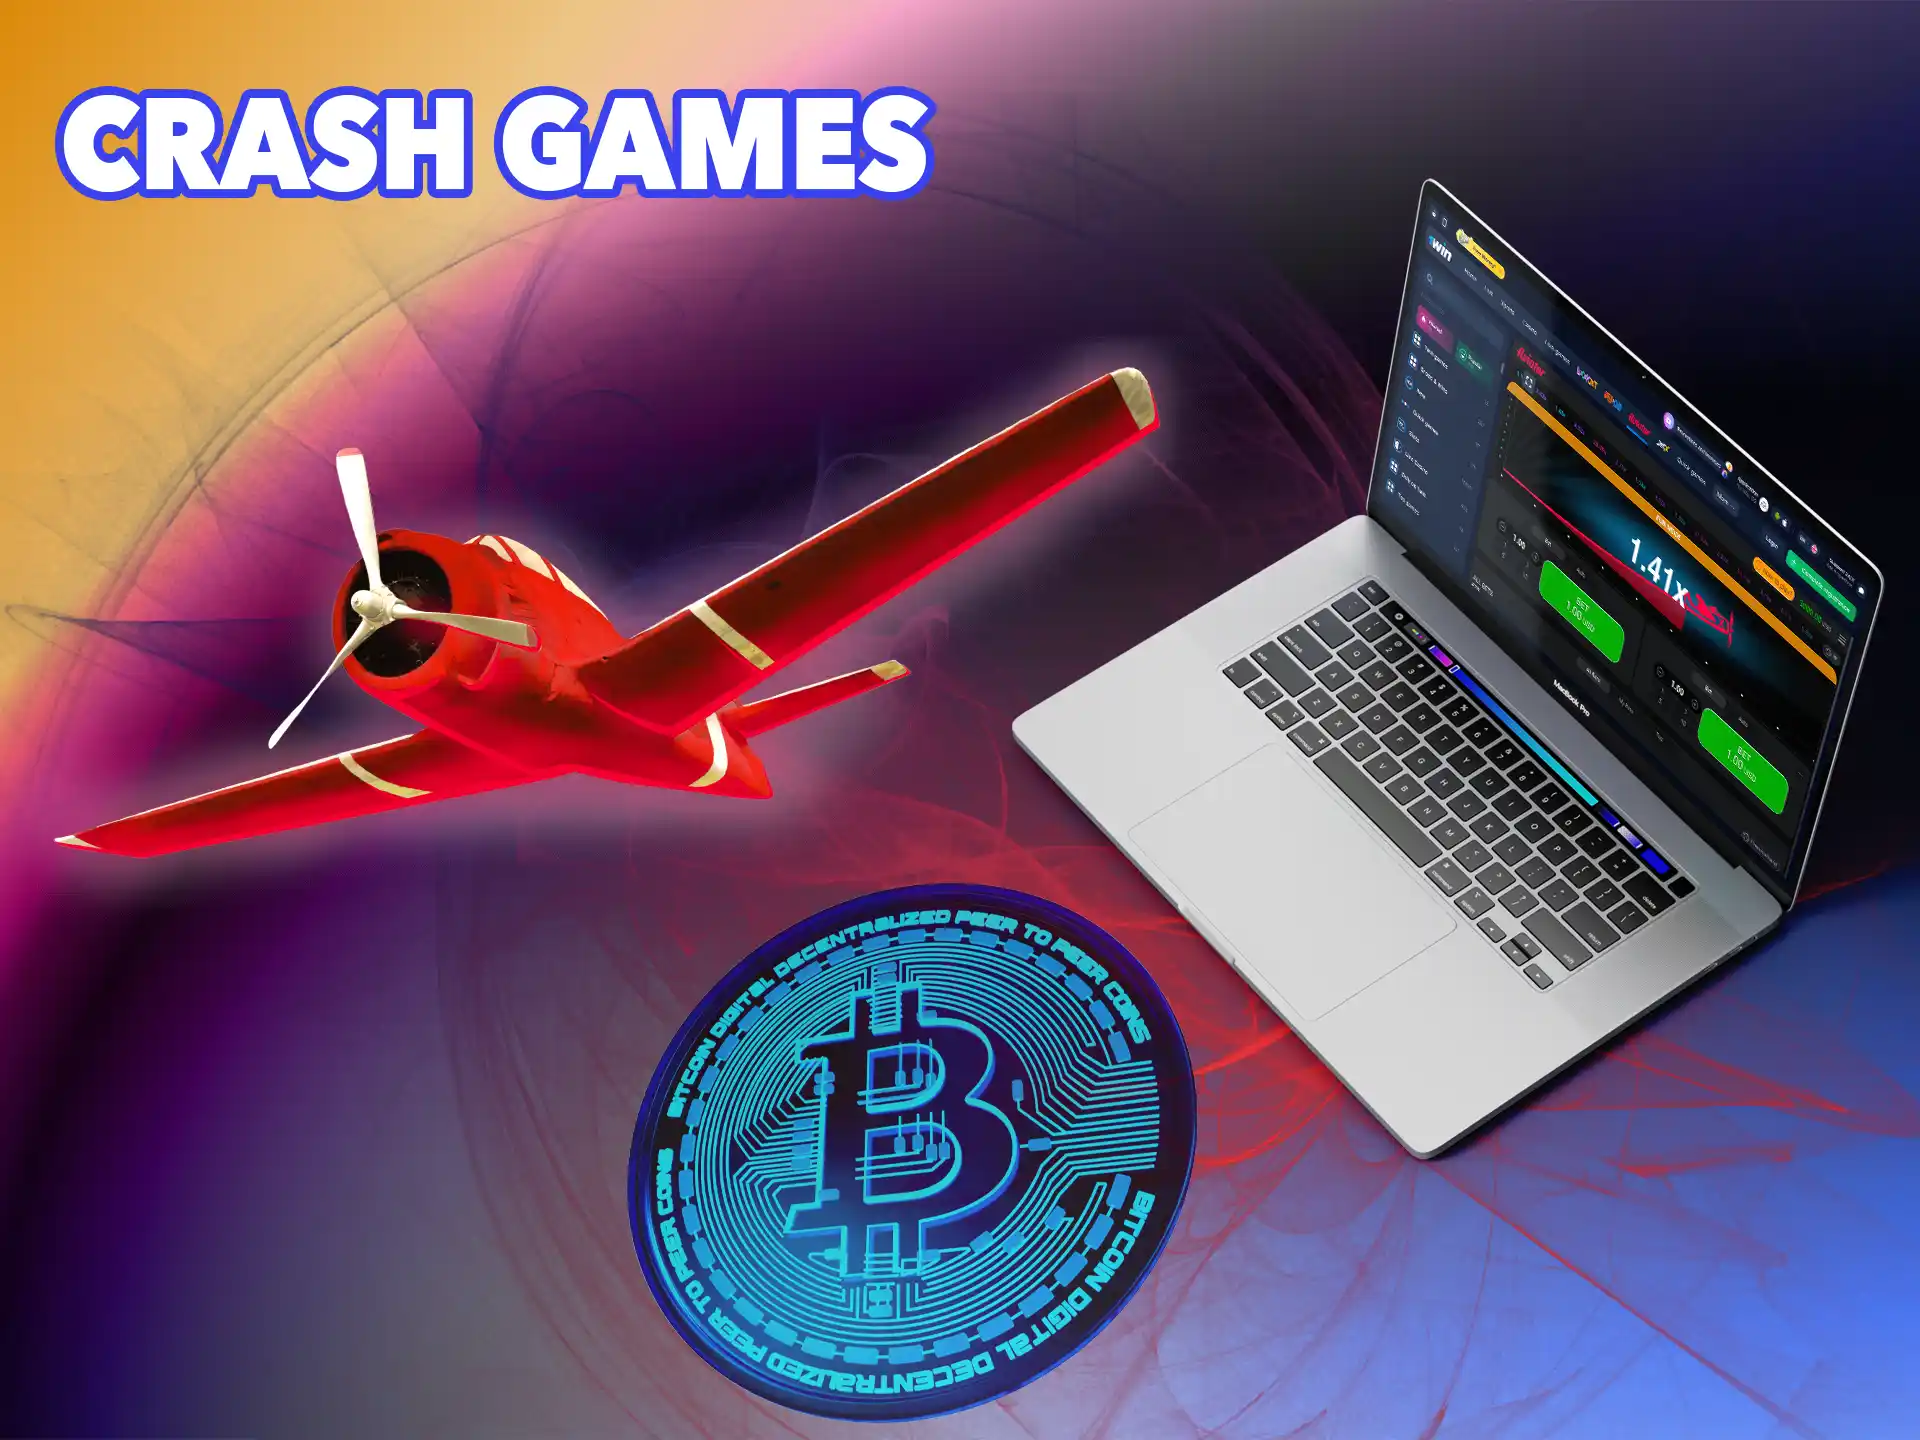 You can win a lot of money in this section betting at small amounts using cryptocurrency.